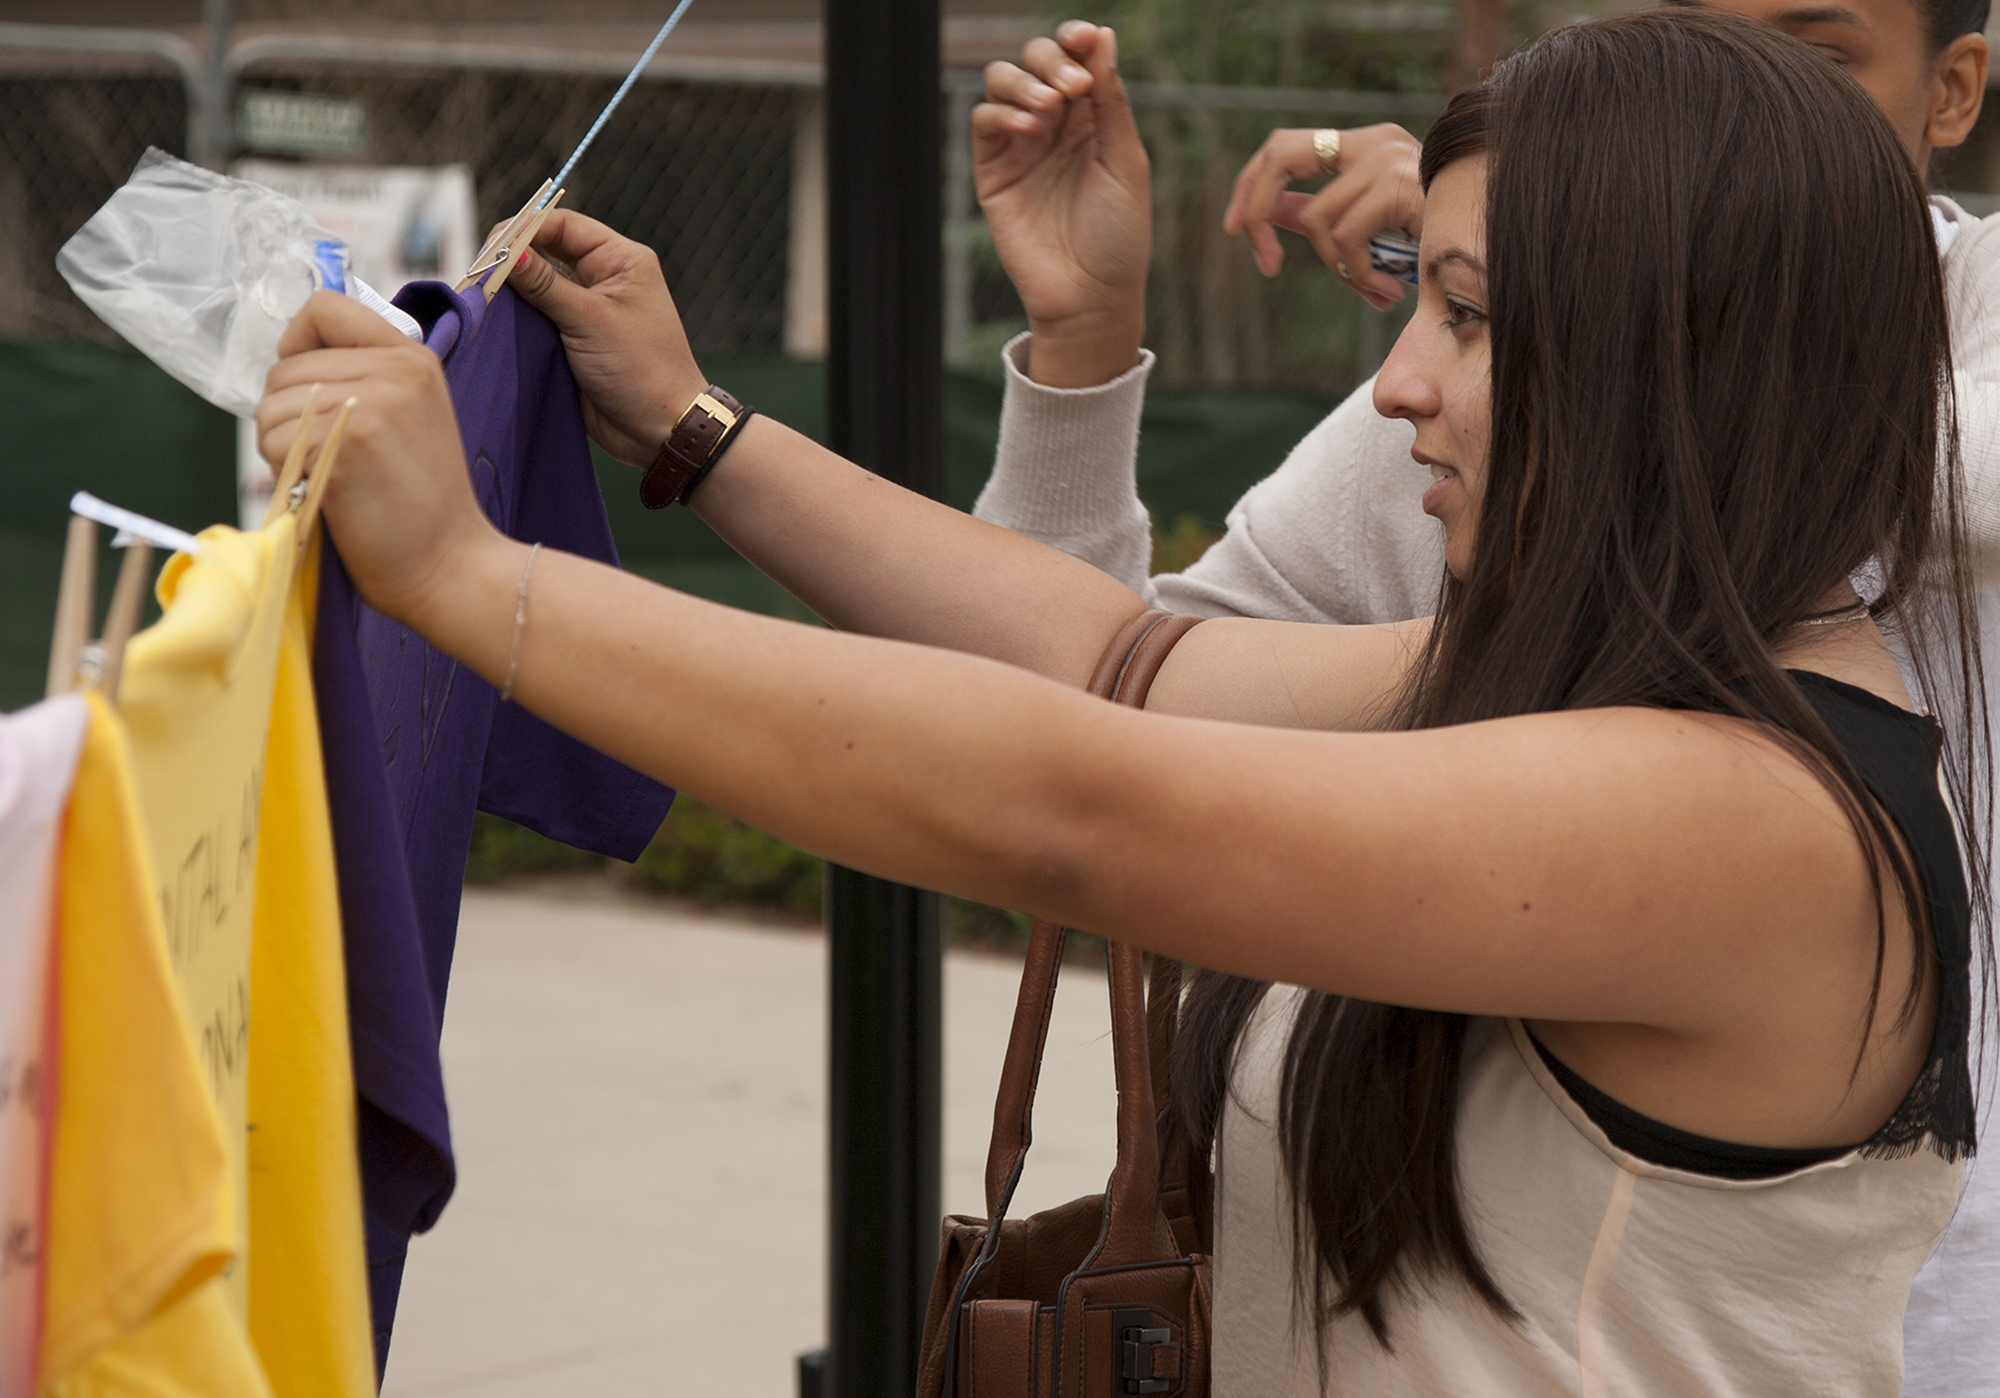 Clothesline Project